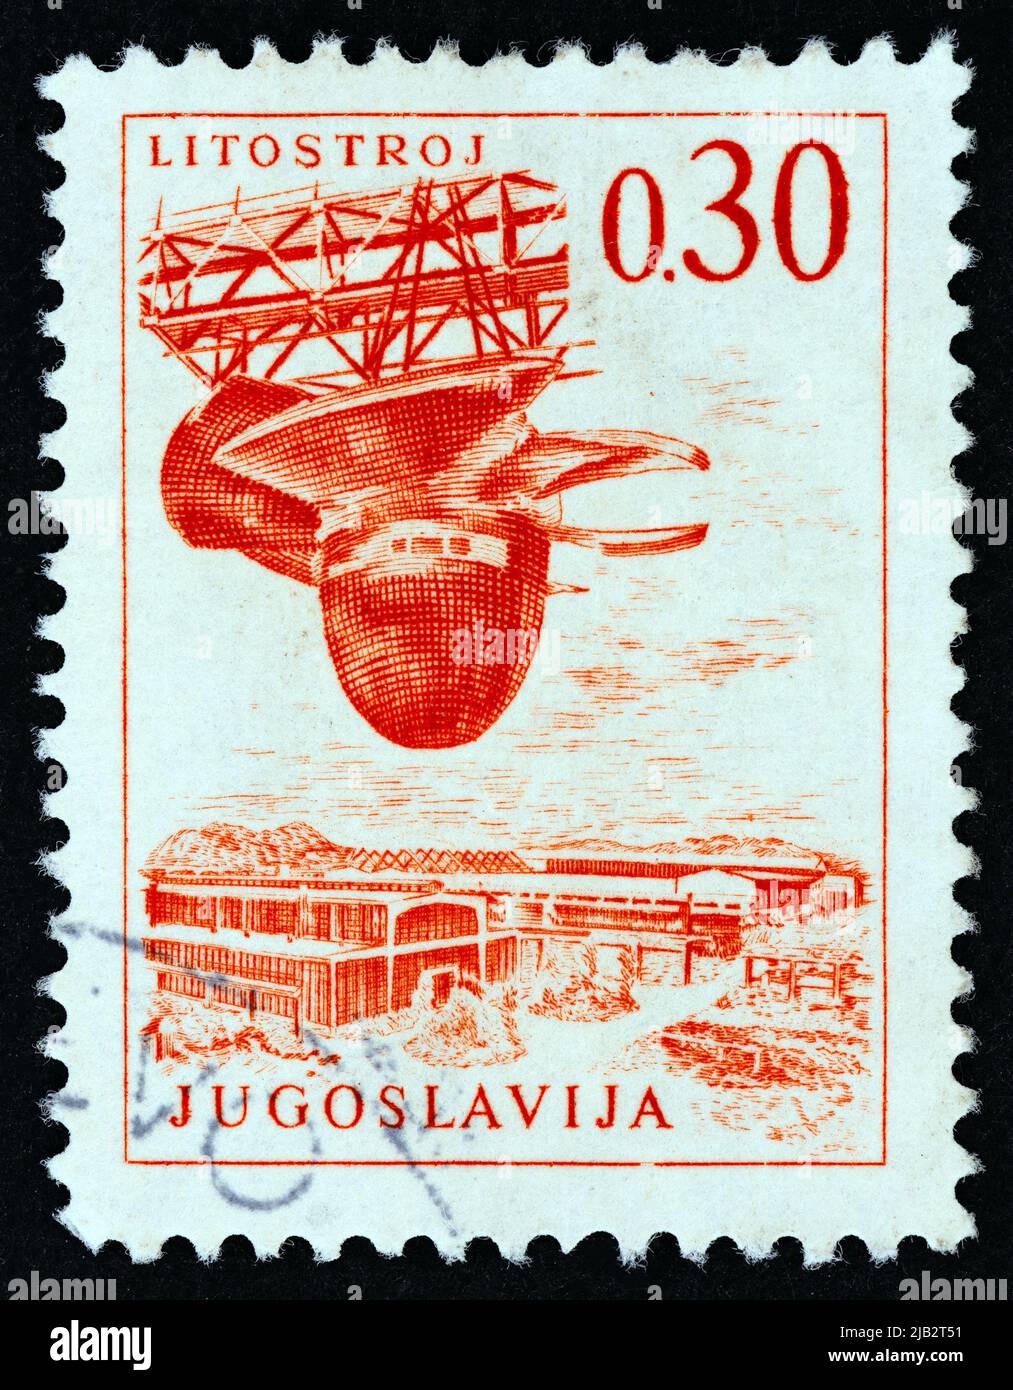 YUGOSLAVIA - CIRCA 1966: A stamp printed in Yugoslavia from the 'Engineering & Architecture' issue shows shipbuilding, circa 1966. Stock Photo